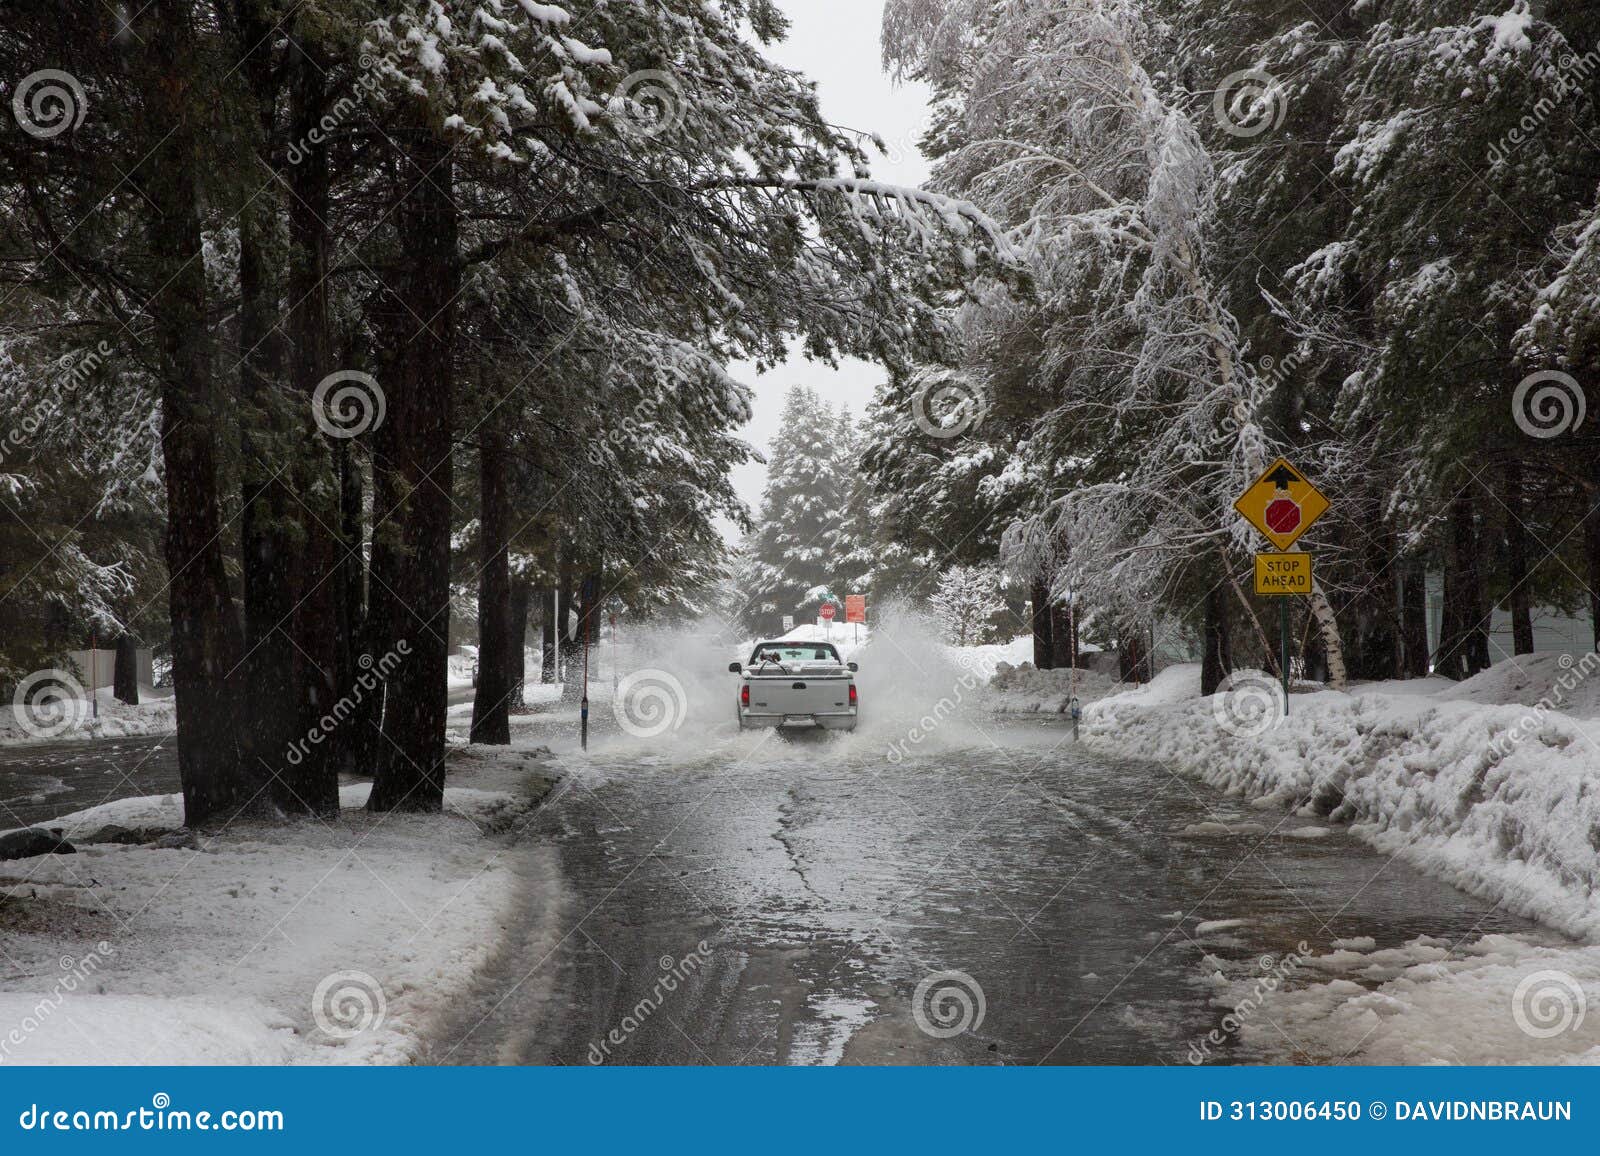 truck driving through flooded road during warm winter storm near lake tahoe